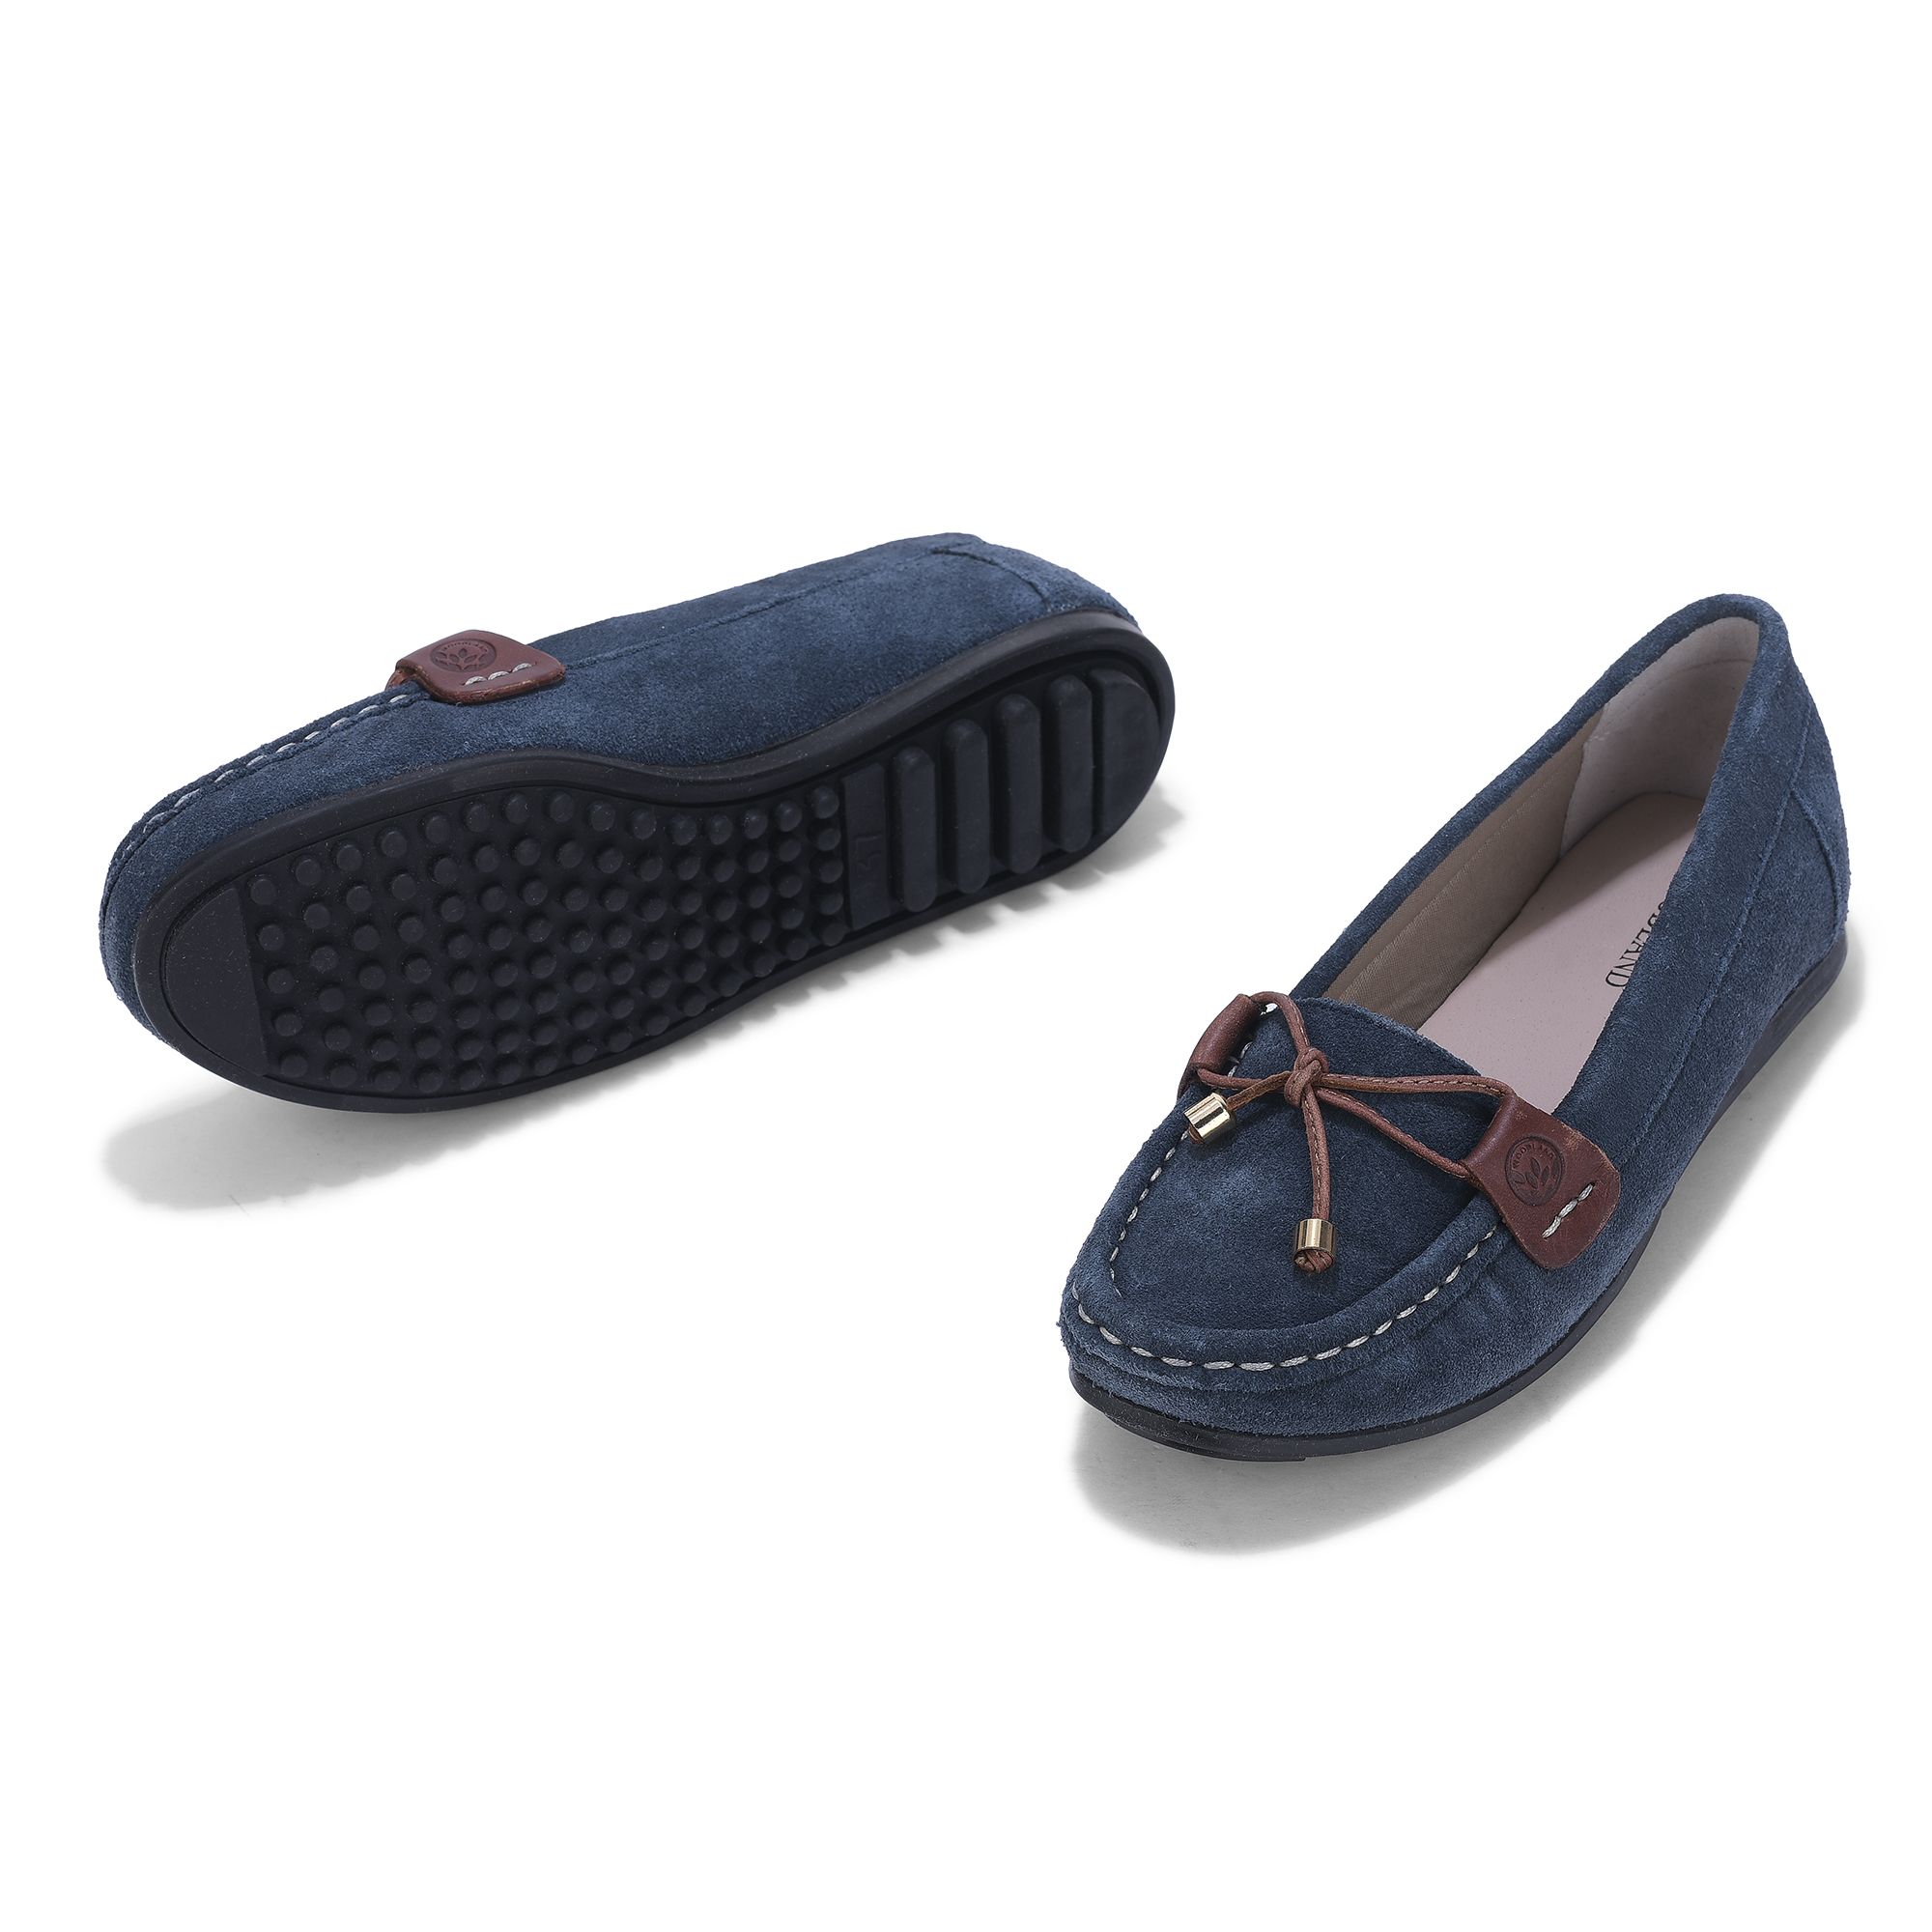 Woodland BRIGHT NAVY loafers for women